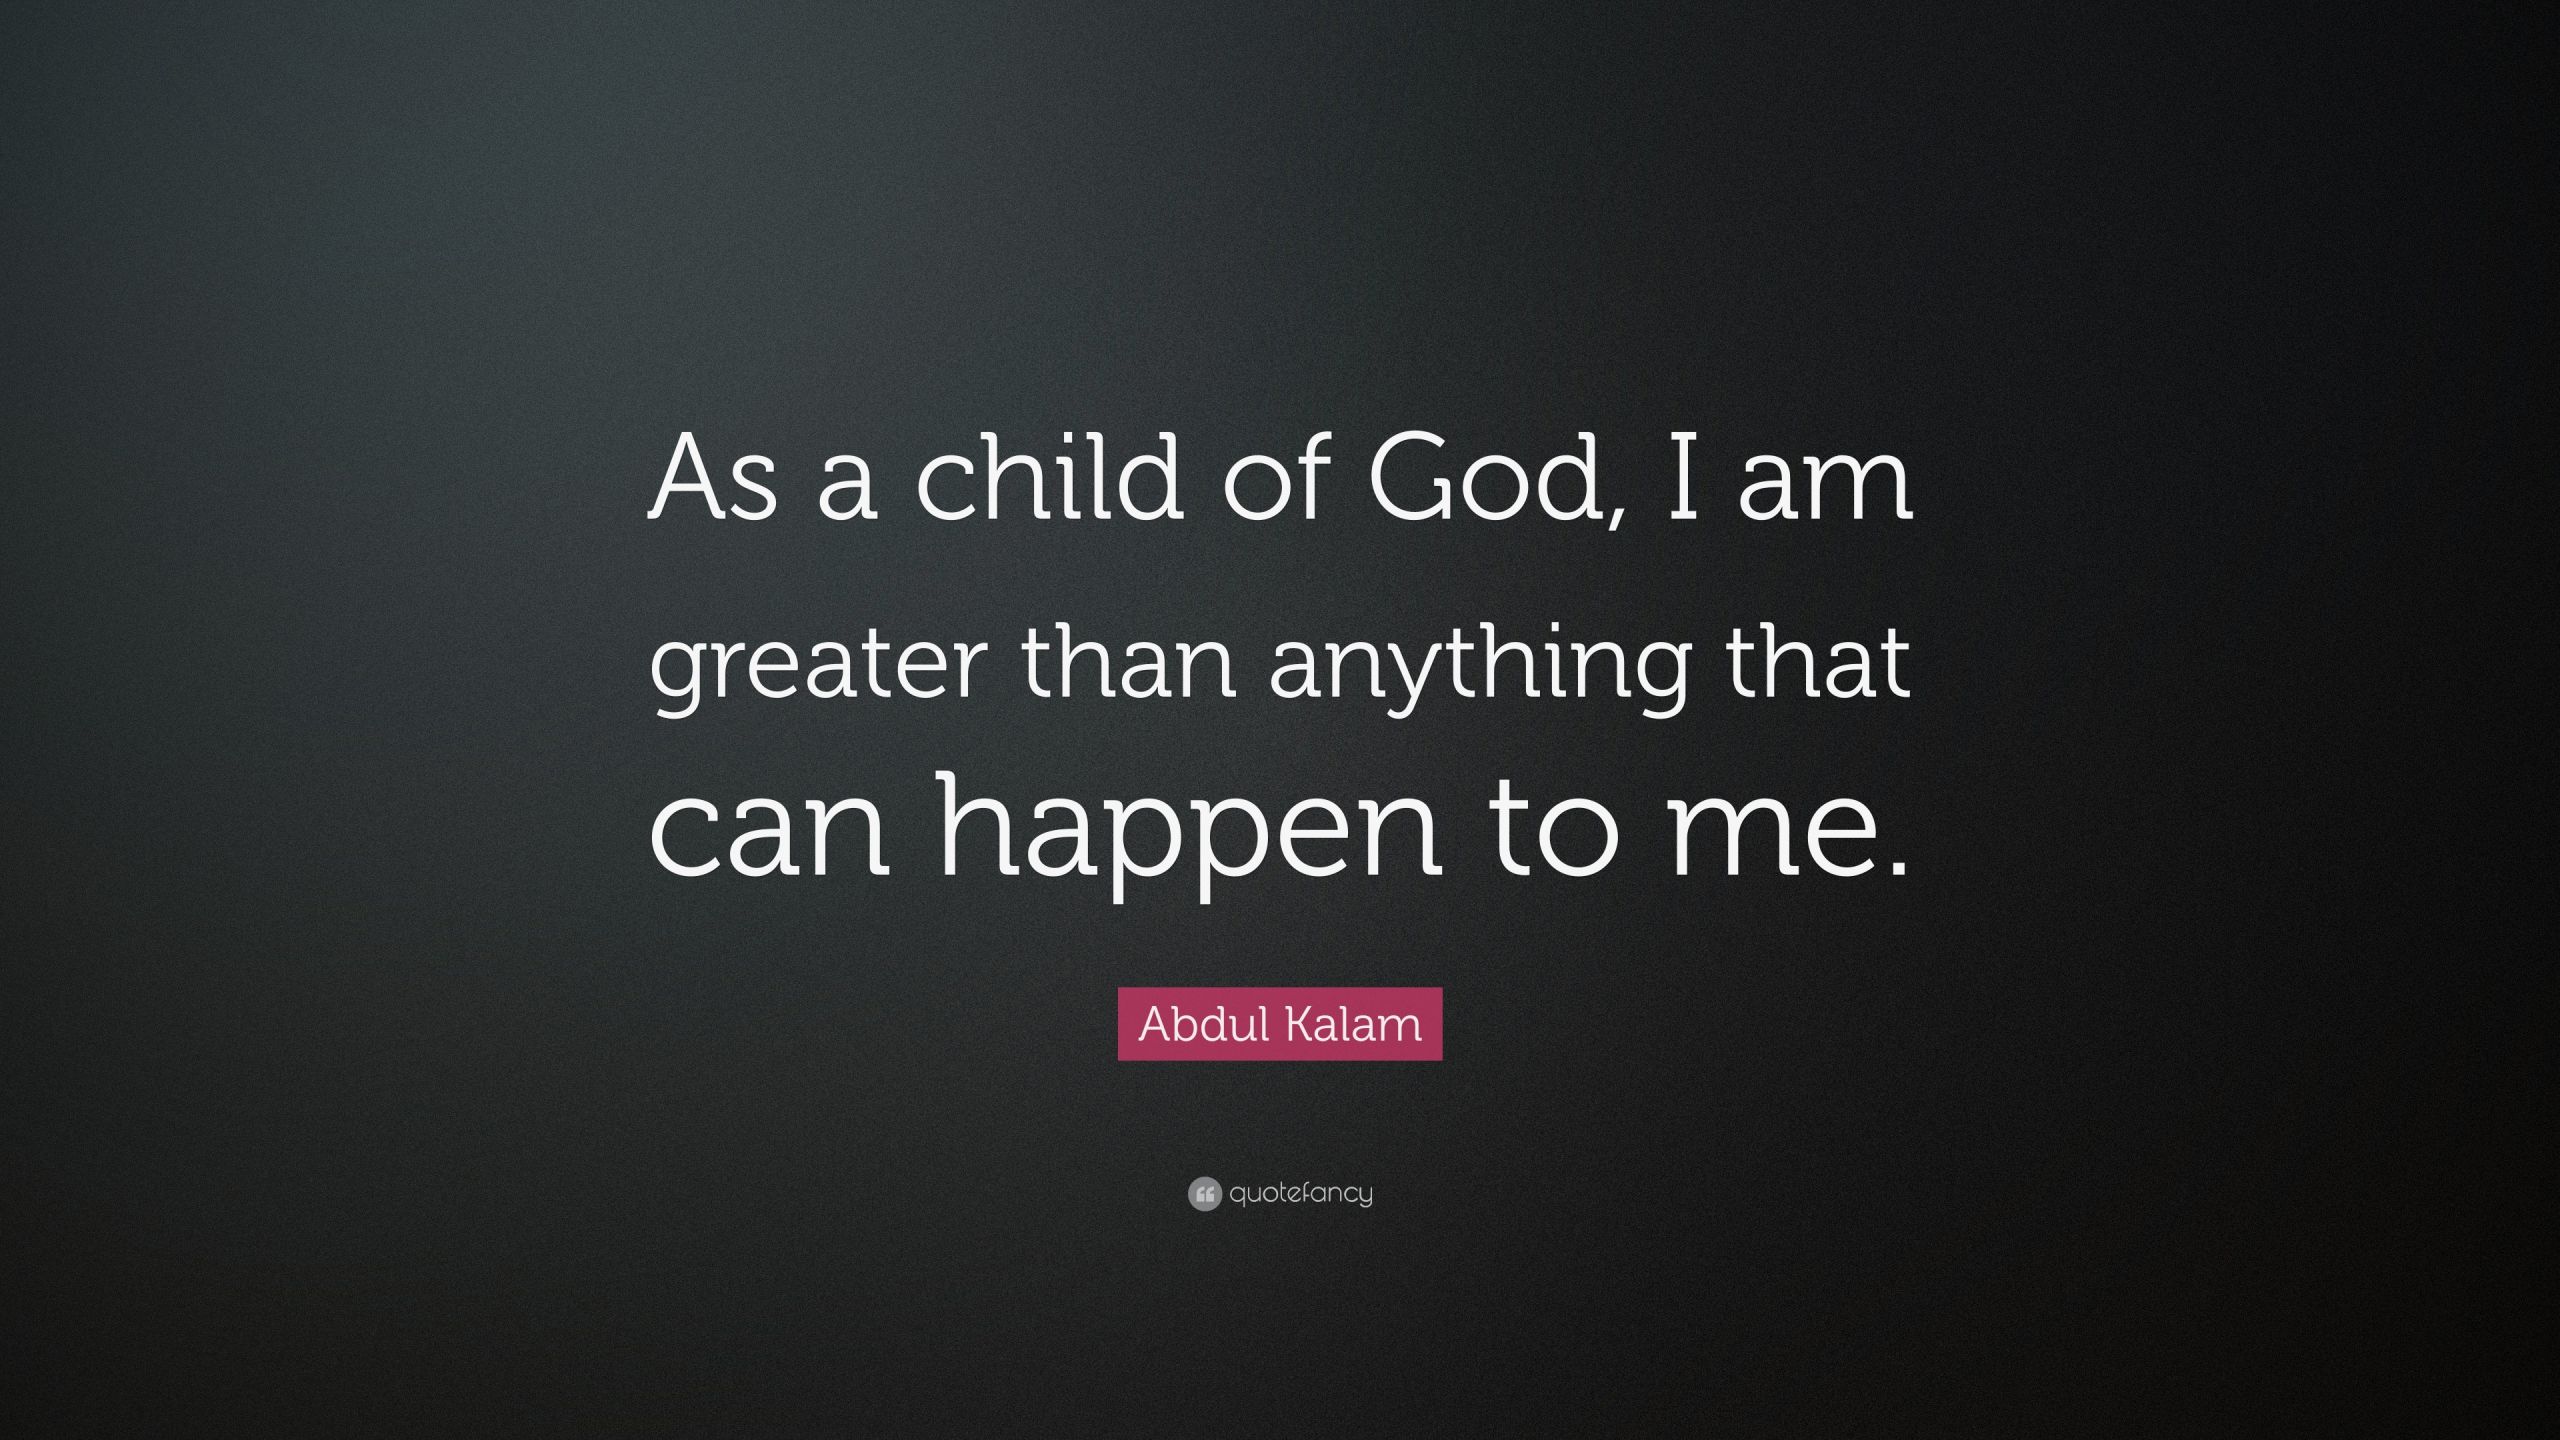 Child Of God Quote
 Abdul Kalam Quote “As a child of God I am greater than